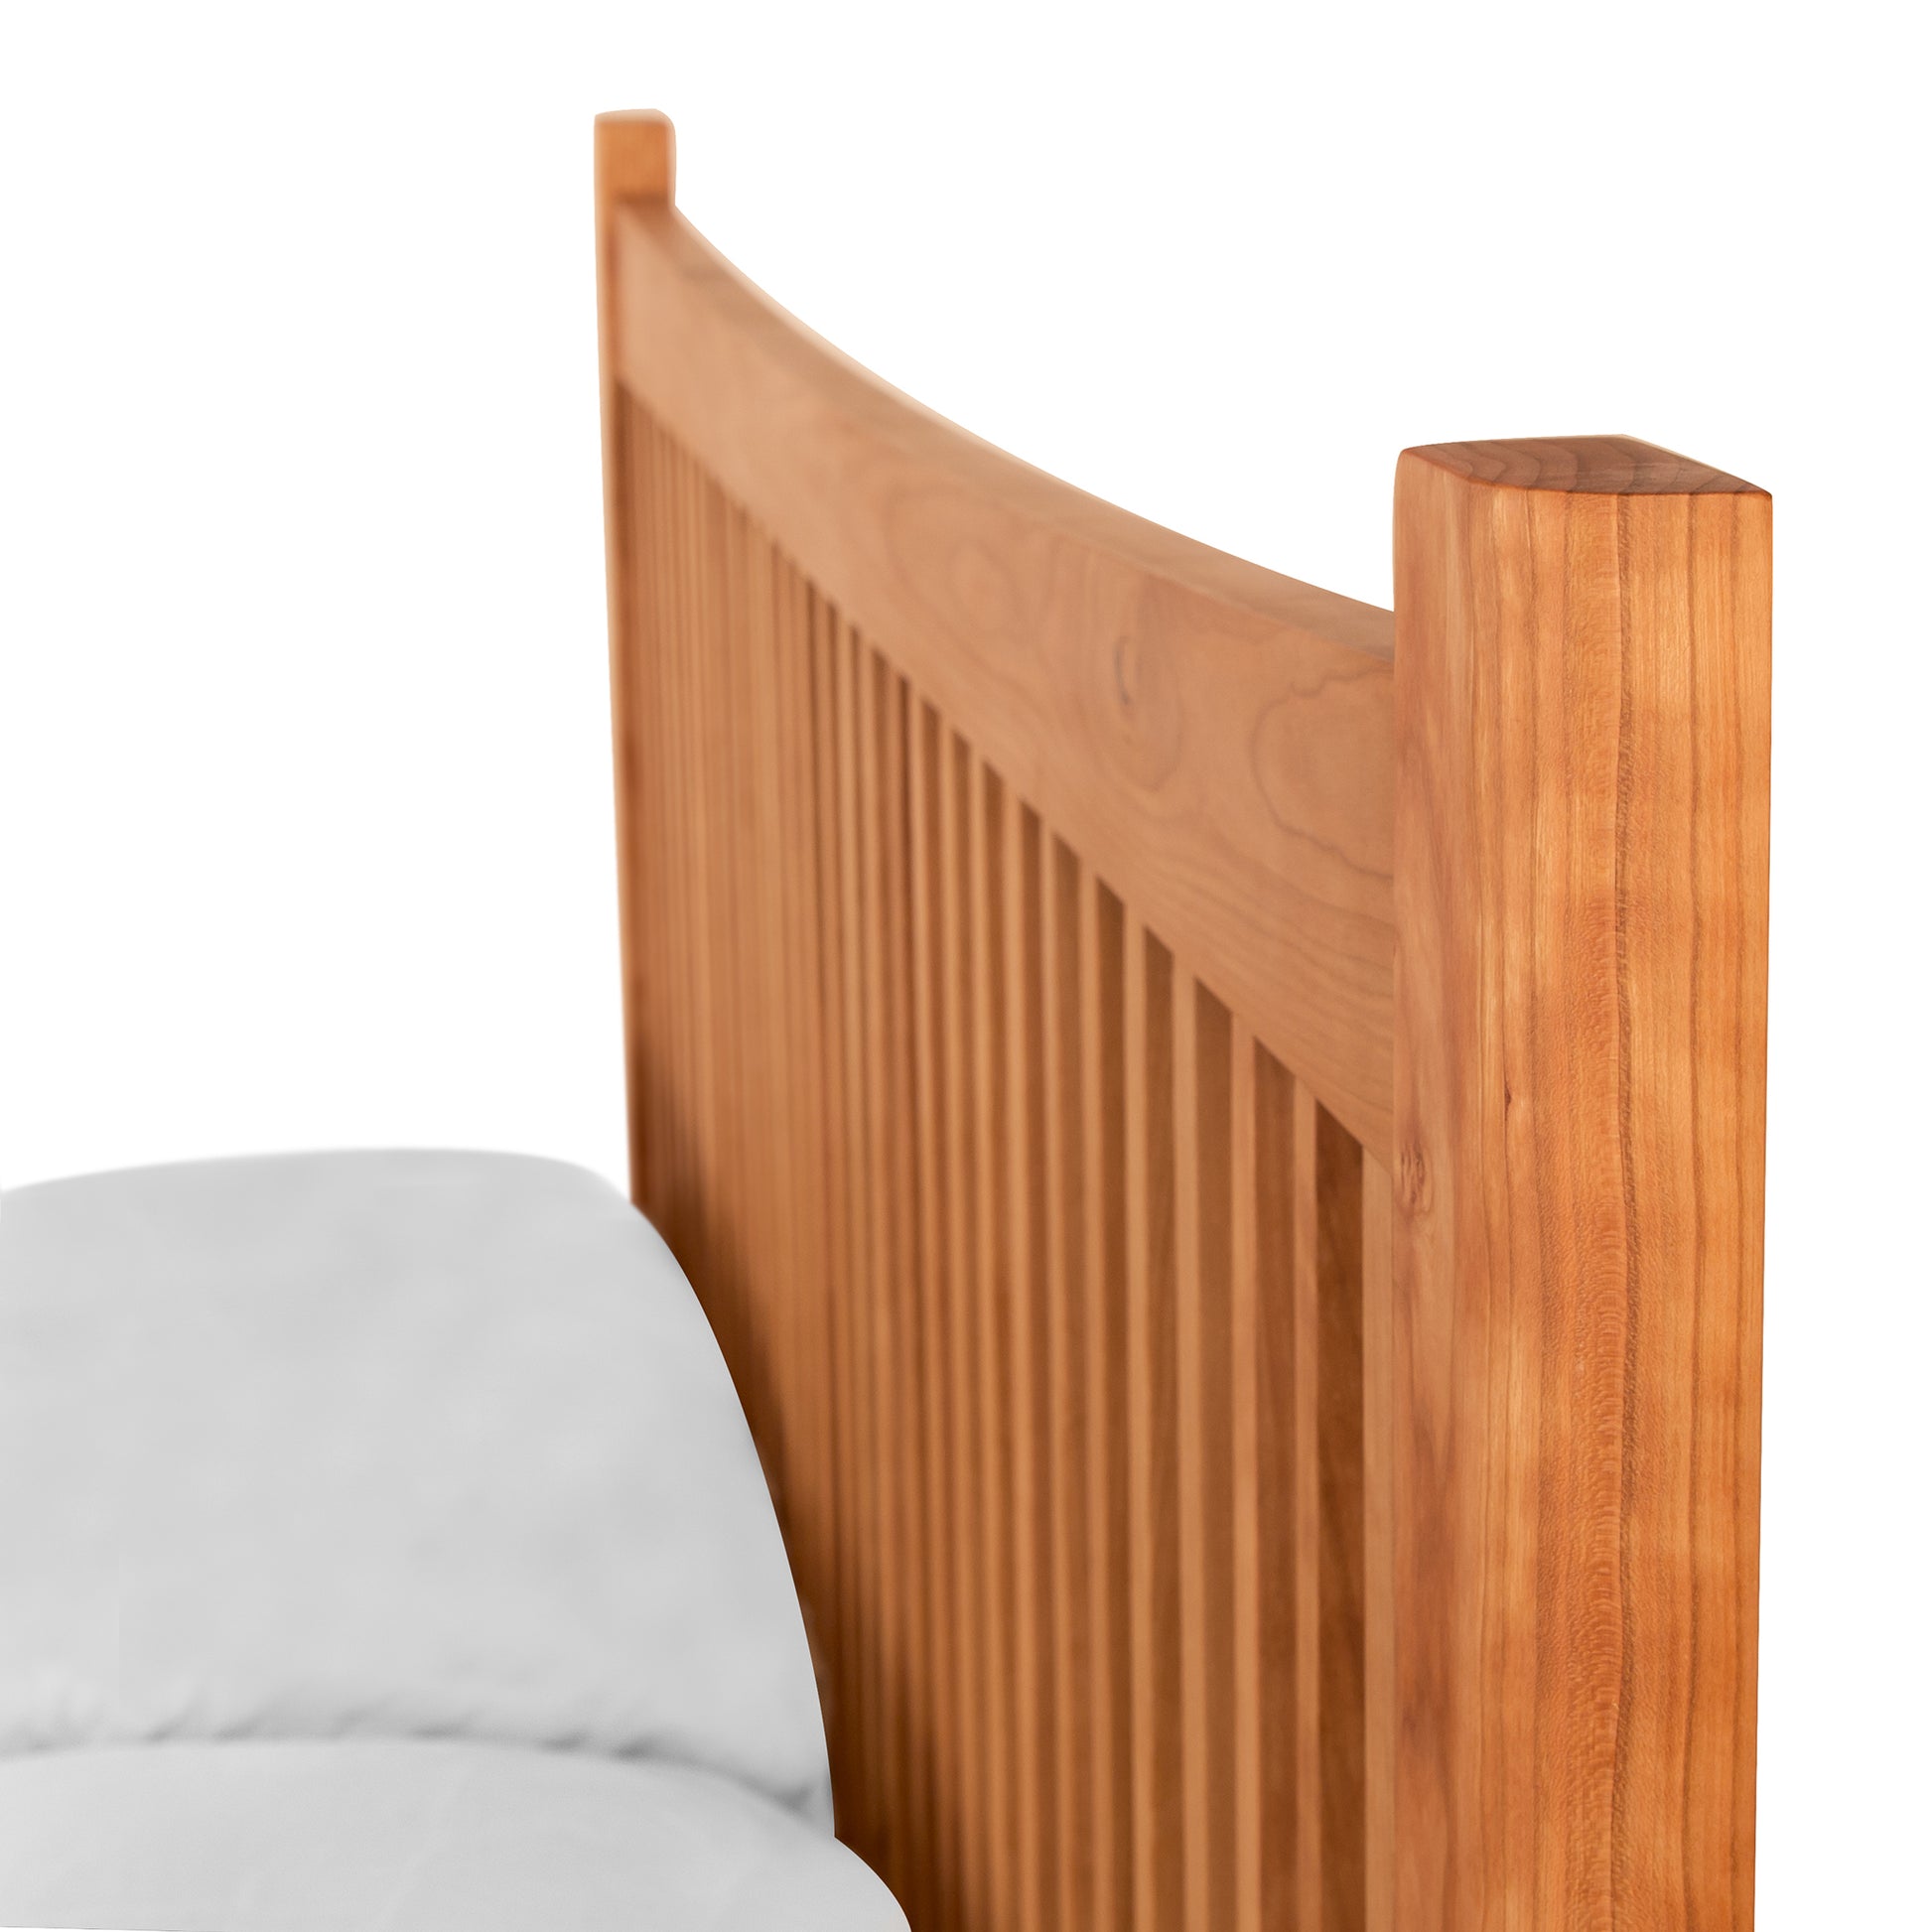 A Heartwood Shaker Low Footboard Bed with vertical slats, featuring a curved top and rich, warm finish in the Arts and Crafts styling. The headboard is attached to a partly visible white mattress. White background.